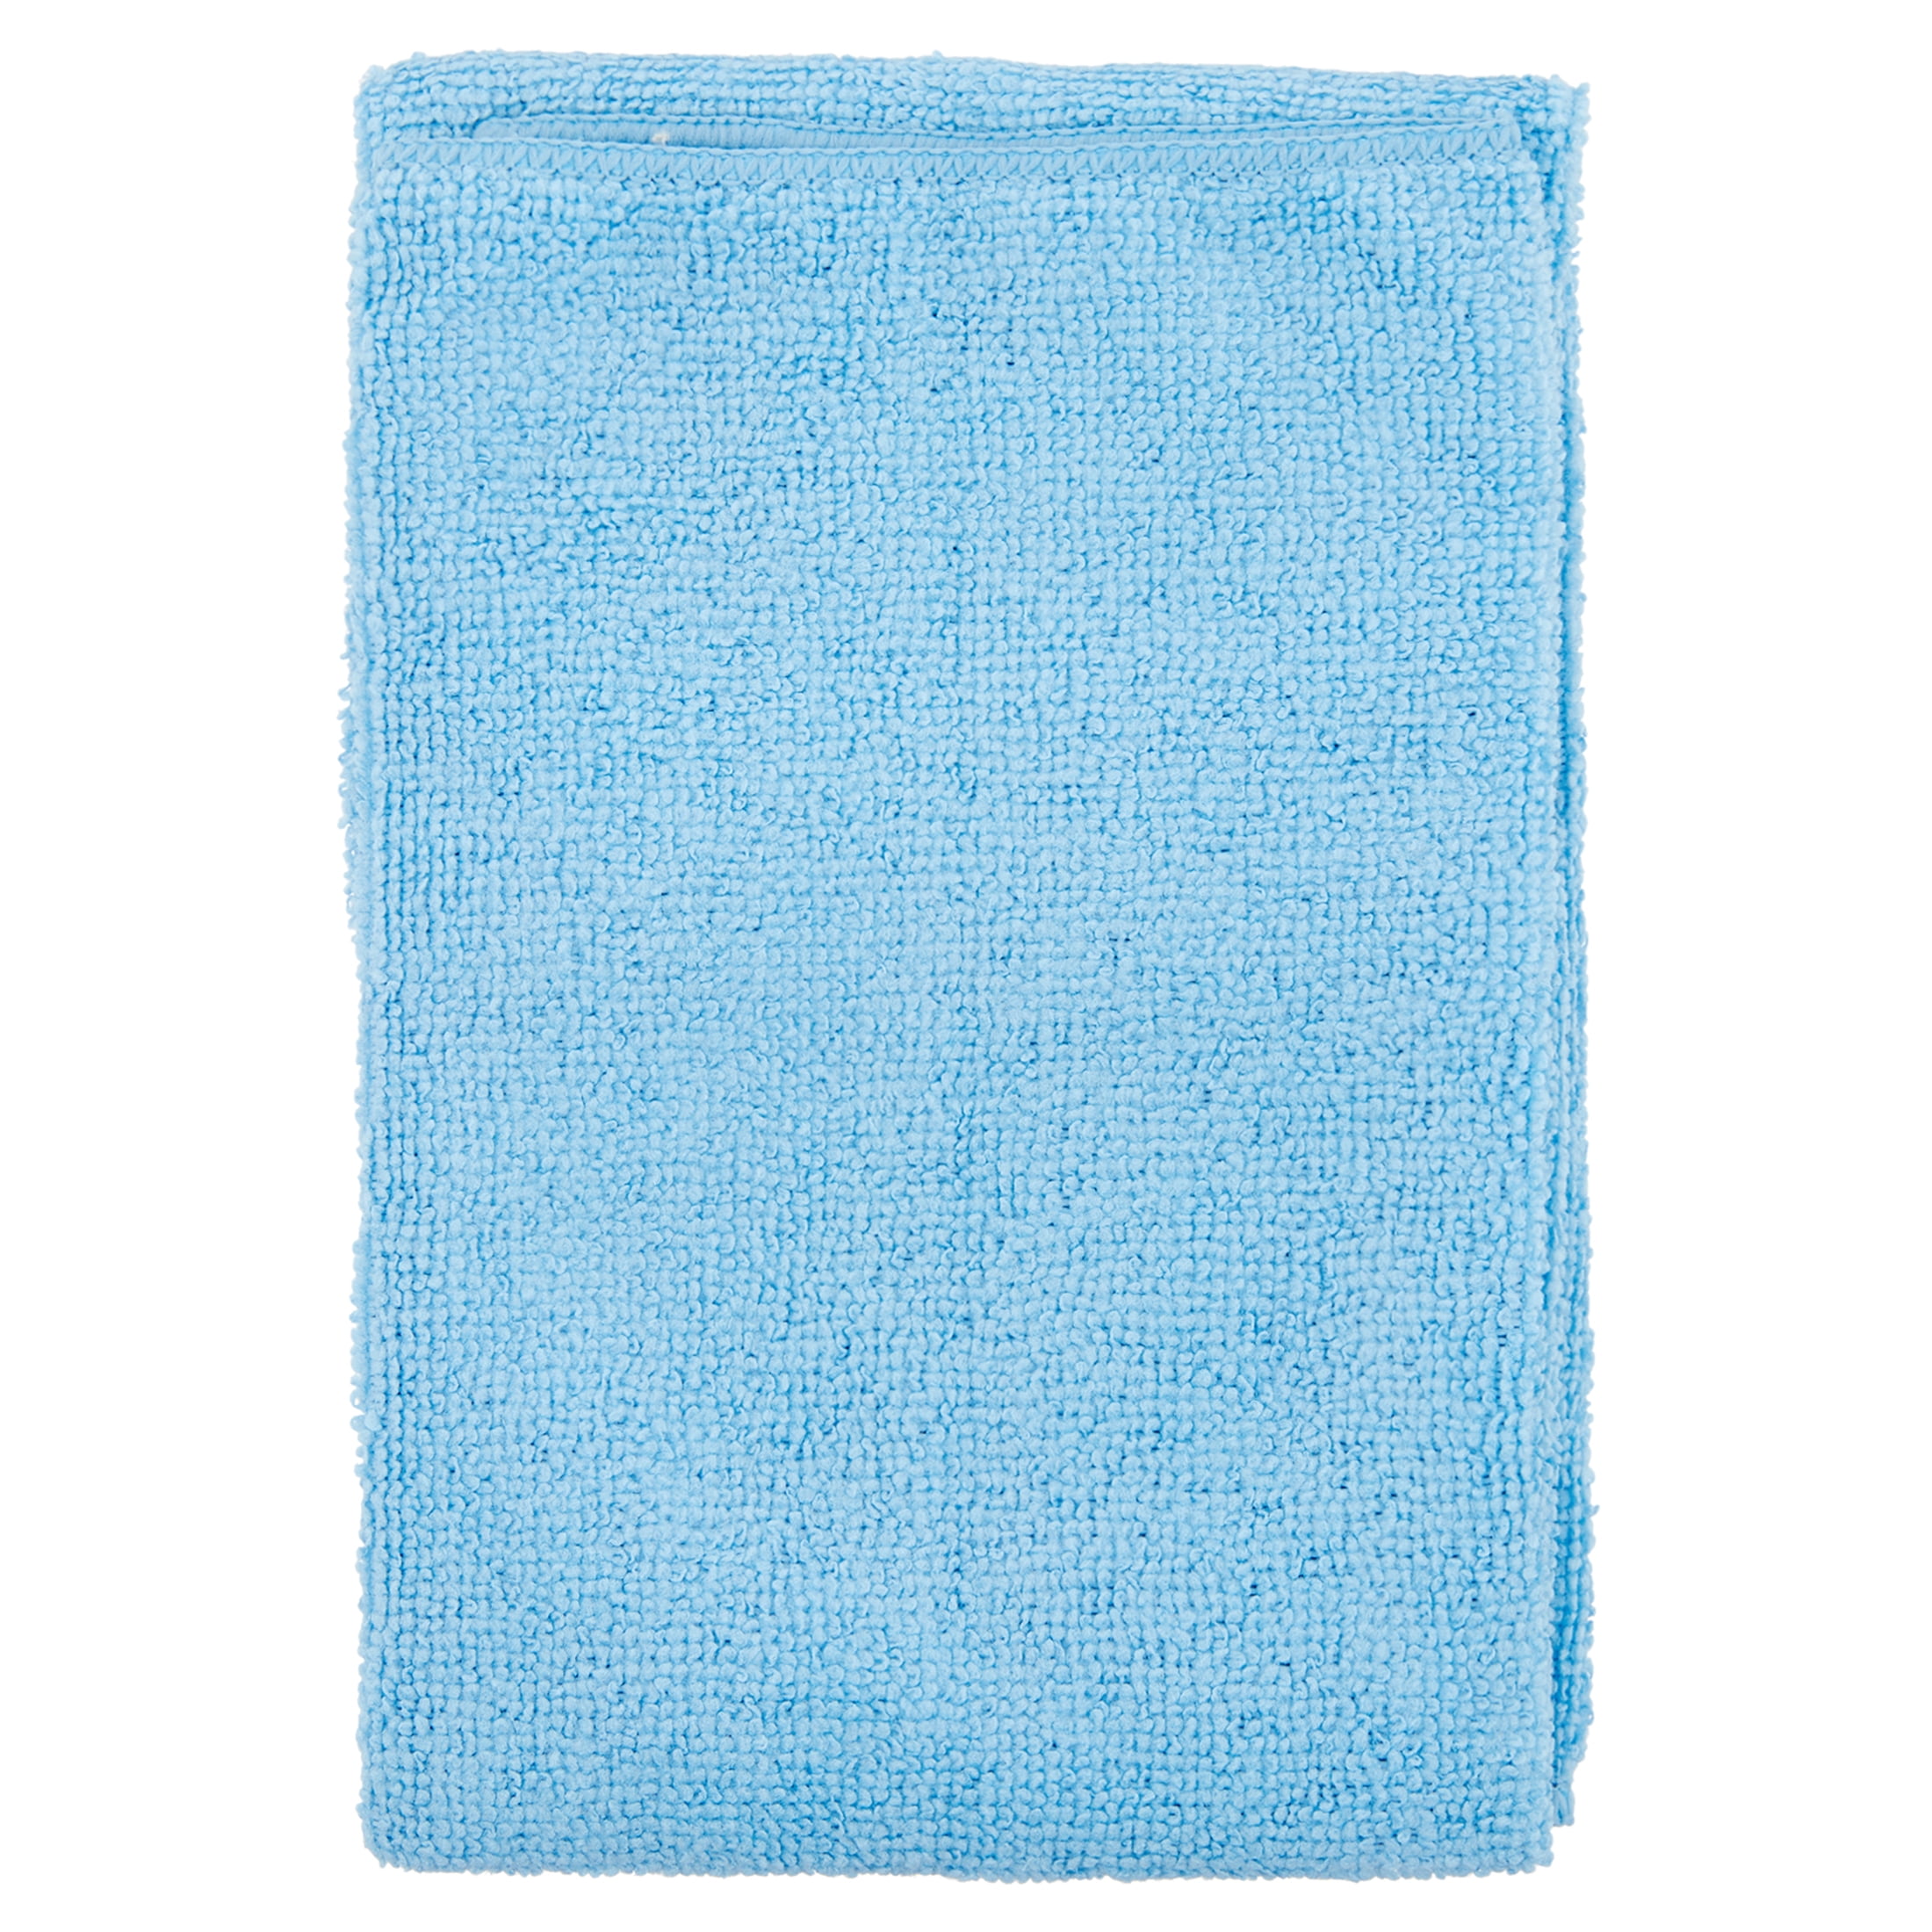 Quickie Microfiber Cleaning Cloth 14 X 14 inch, Blue, 12 Pack, All-Purpose  Towel/Wiper for Multi-Purpose Indoor/Outdoor Cleaning/Dusting/Polishing on